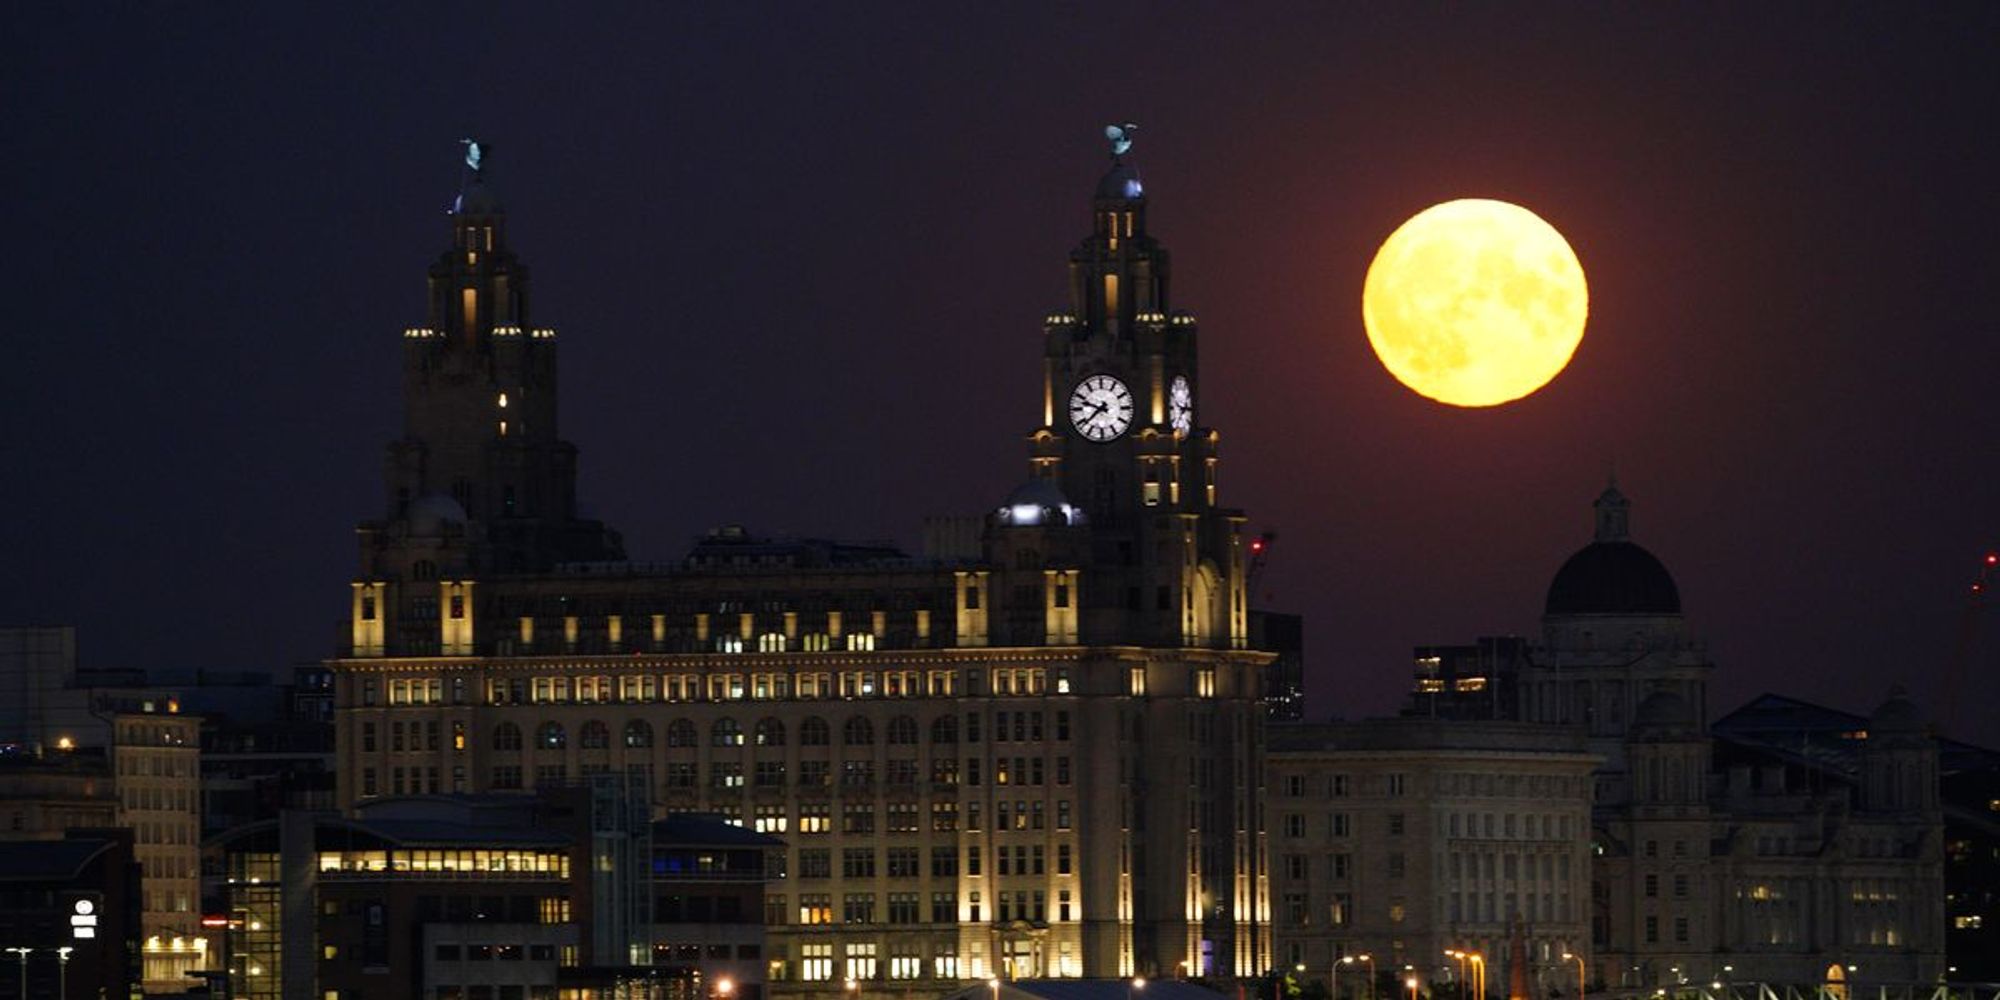 Pictures: Spectacular supermoon lights up evening sky